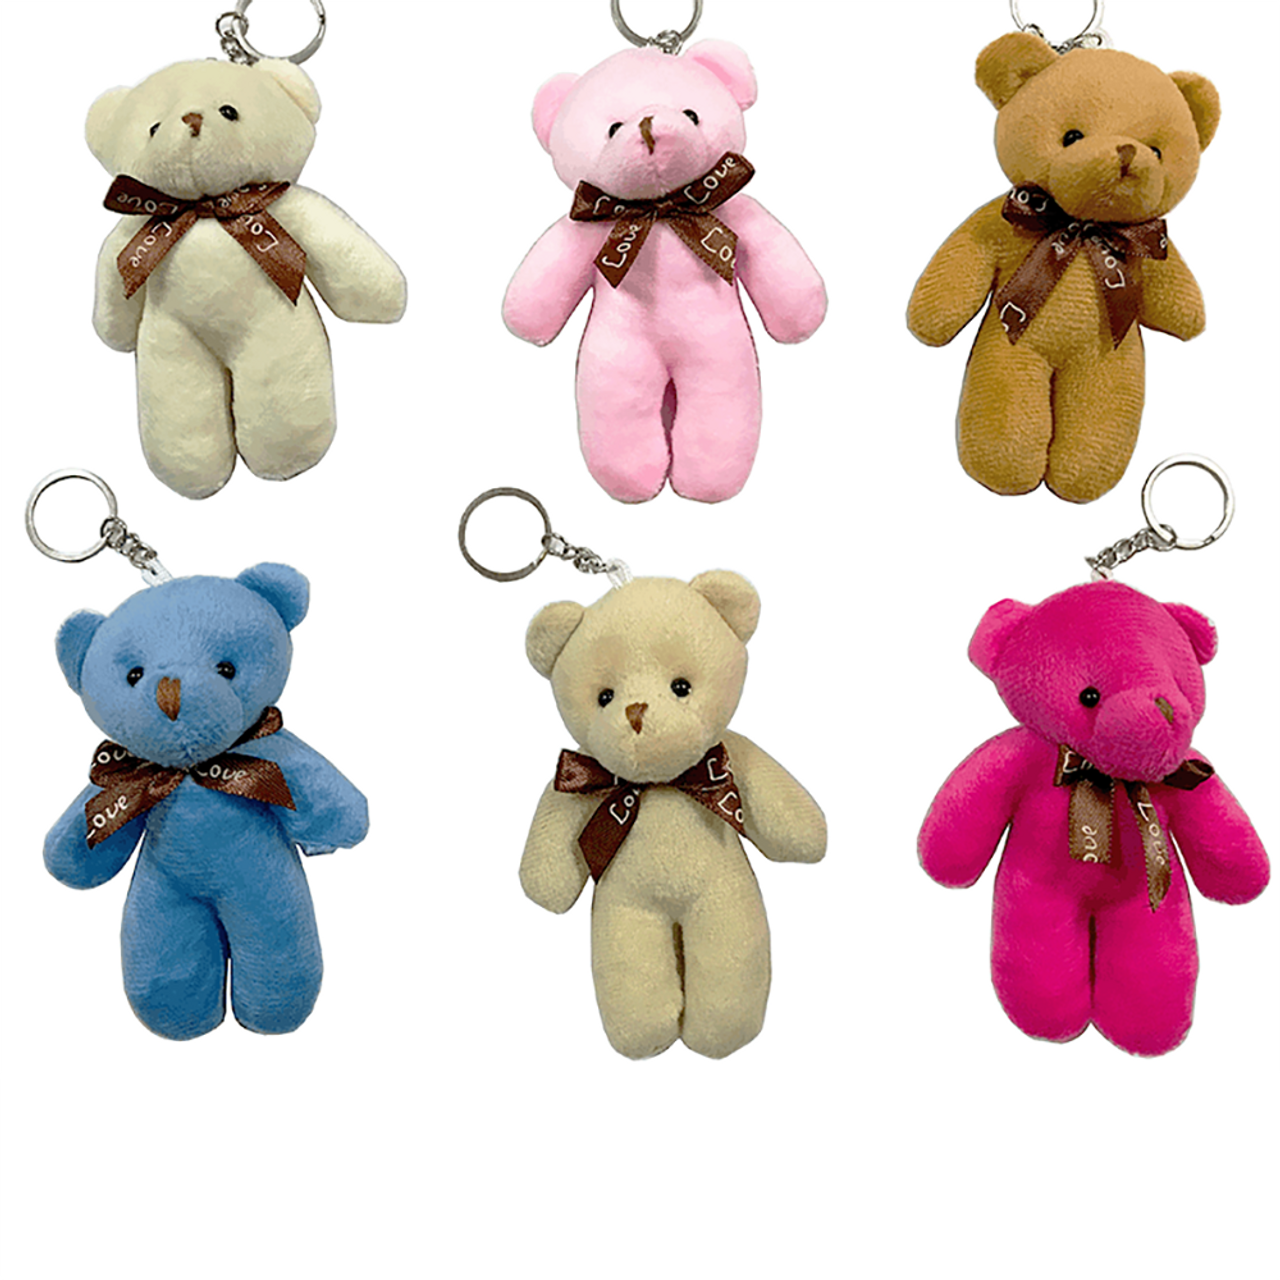 Colorful Bear Keychain Couples Gift Key Chain Animal Doll Key Ring For Bags  Creative Fashion Cool